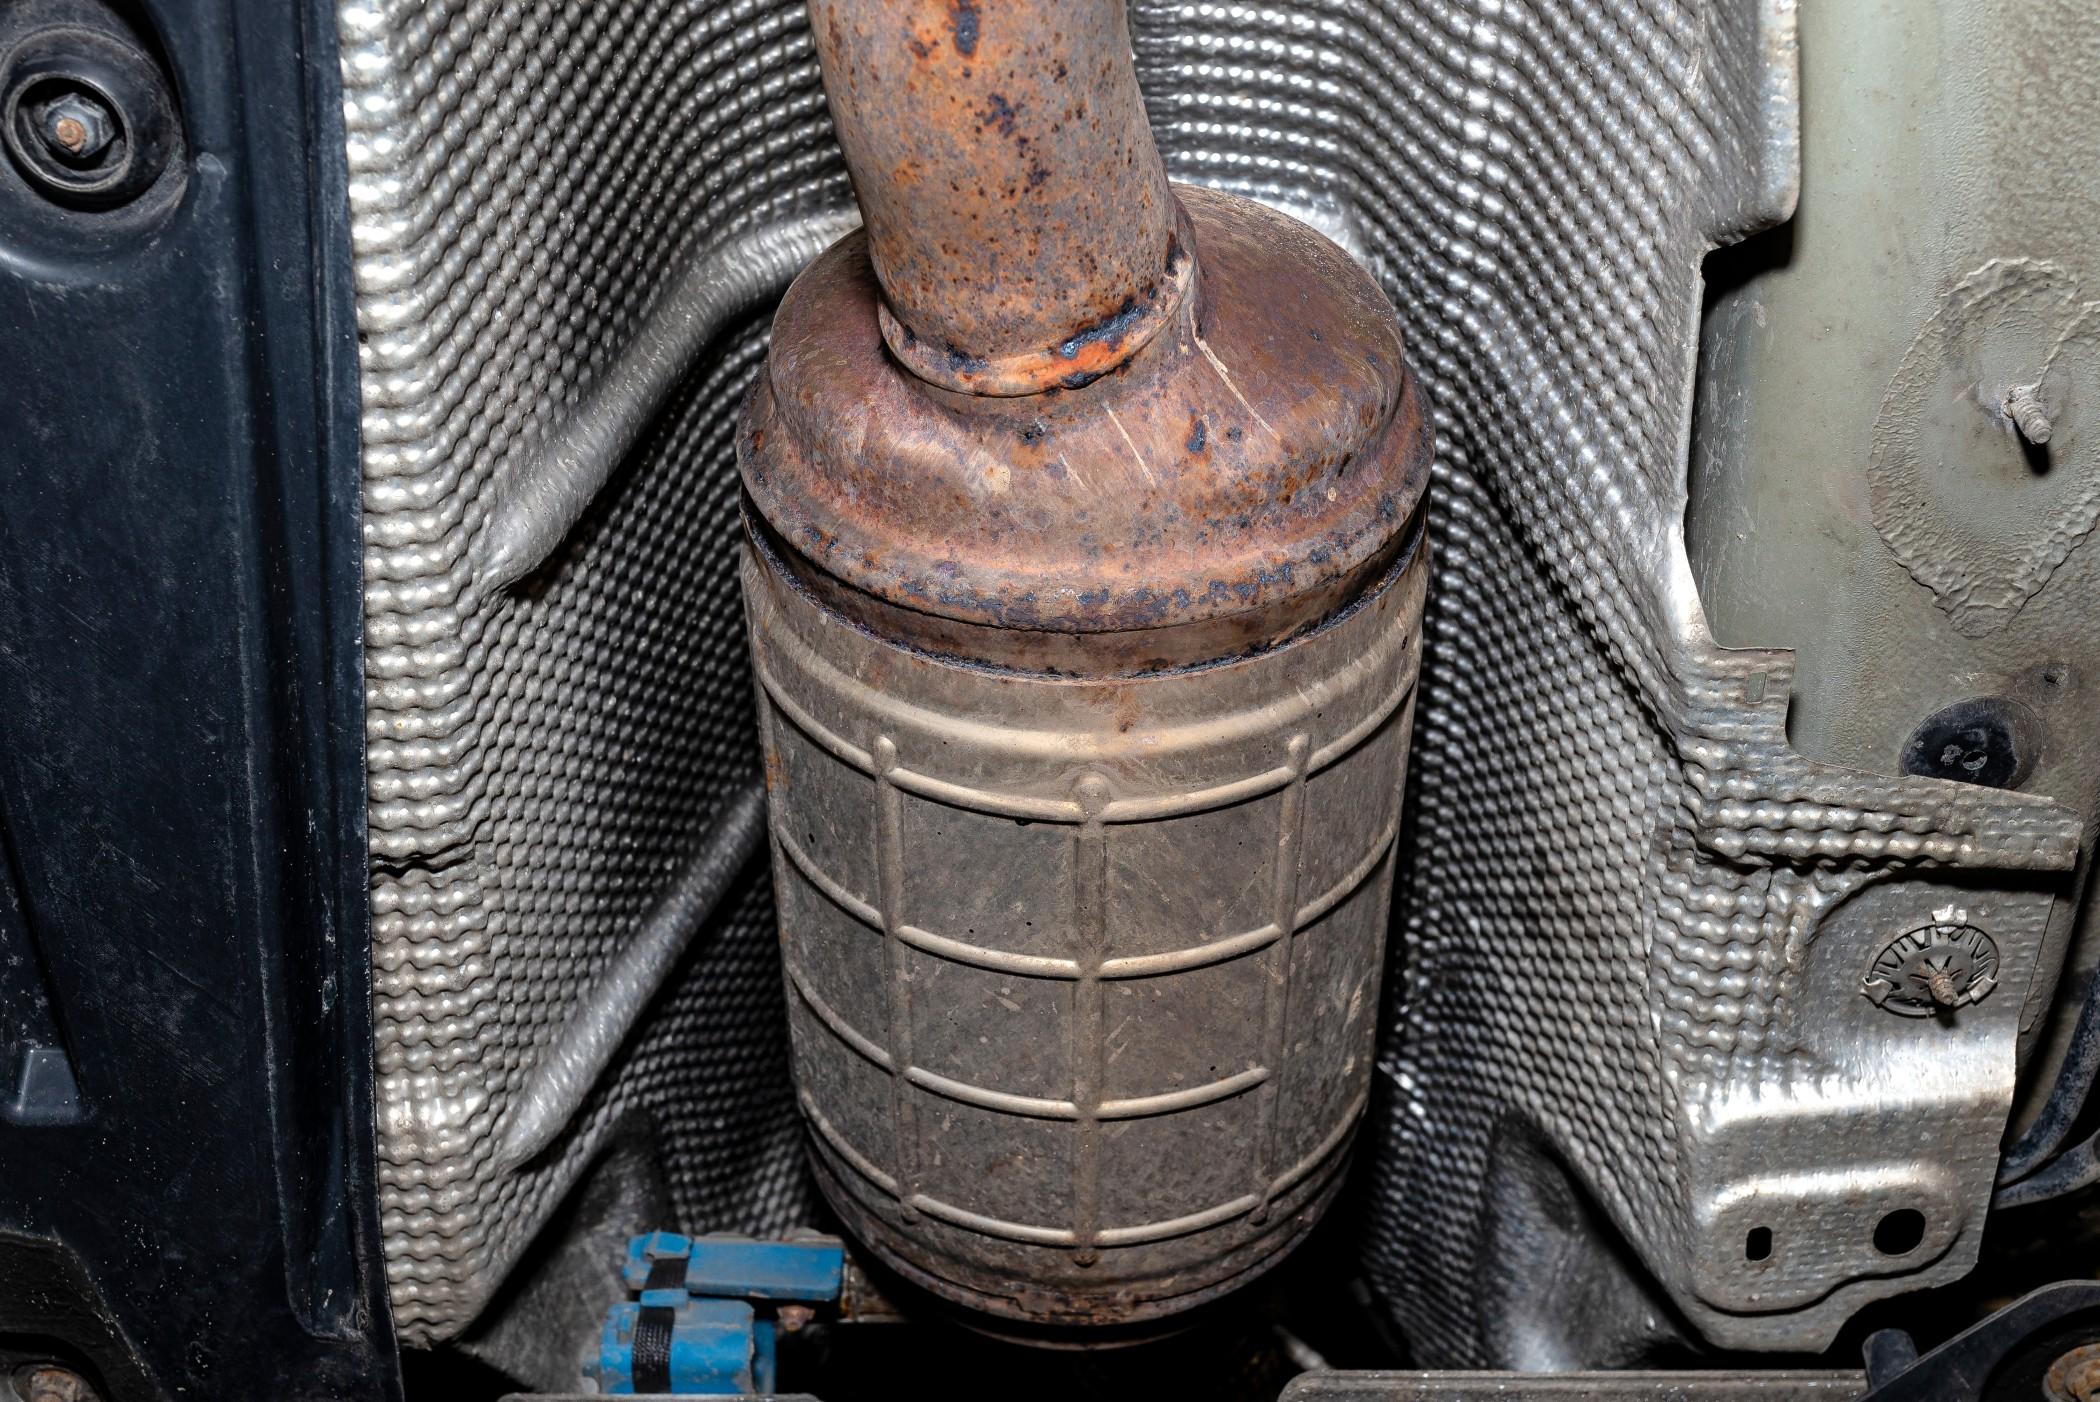 Car thieves are stealing catalytic converters at a dramatically increased rate | Twenty20